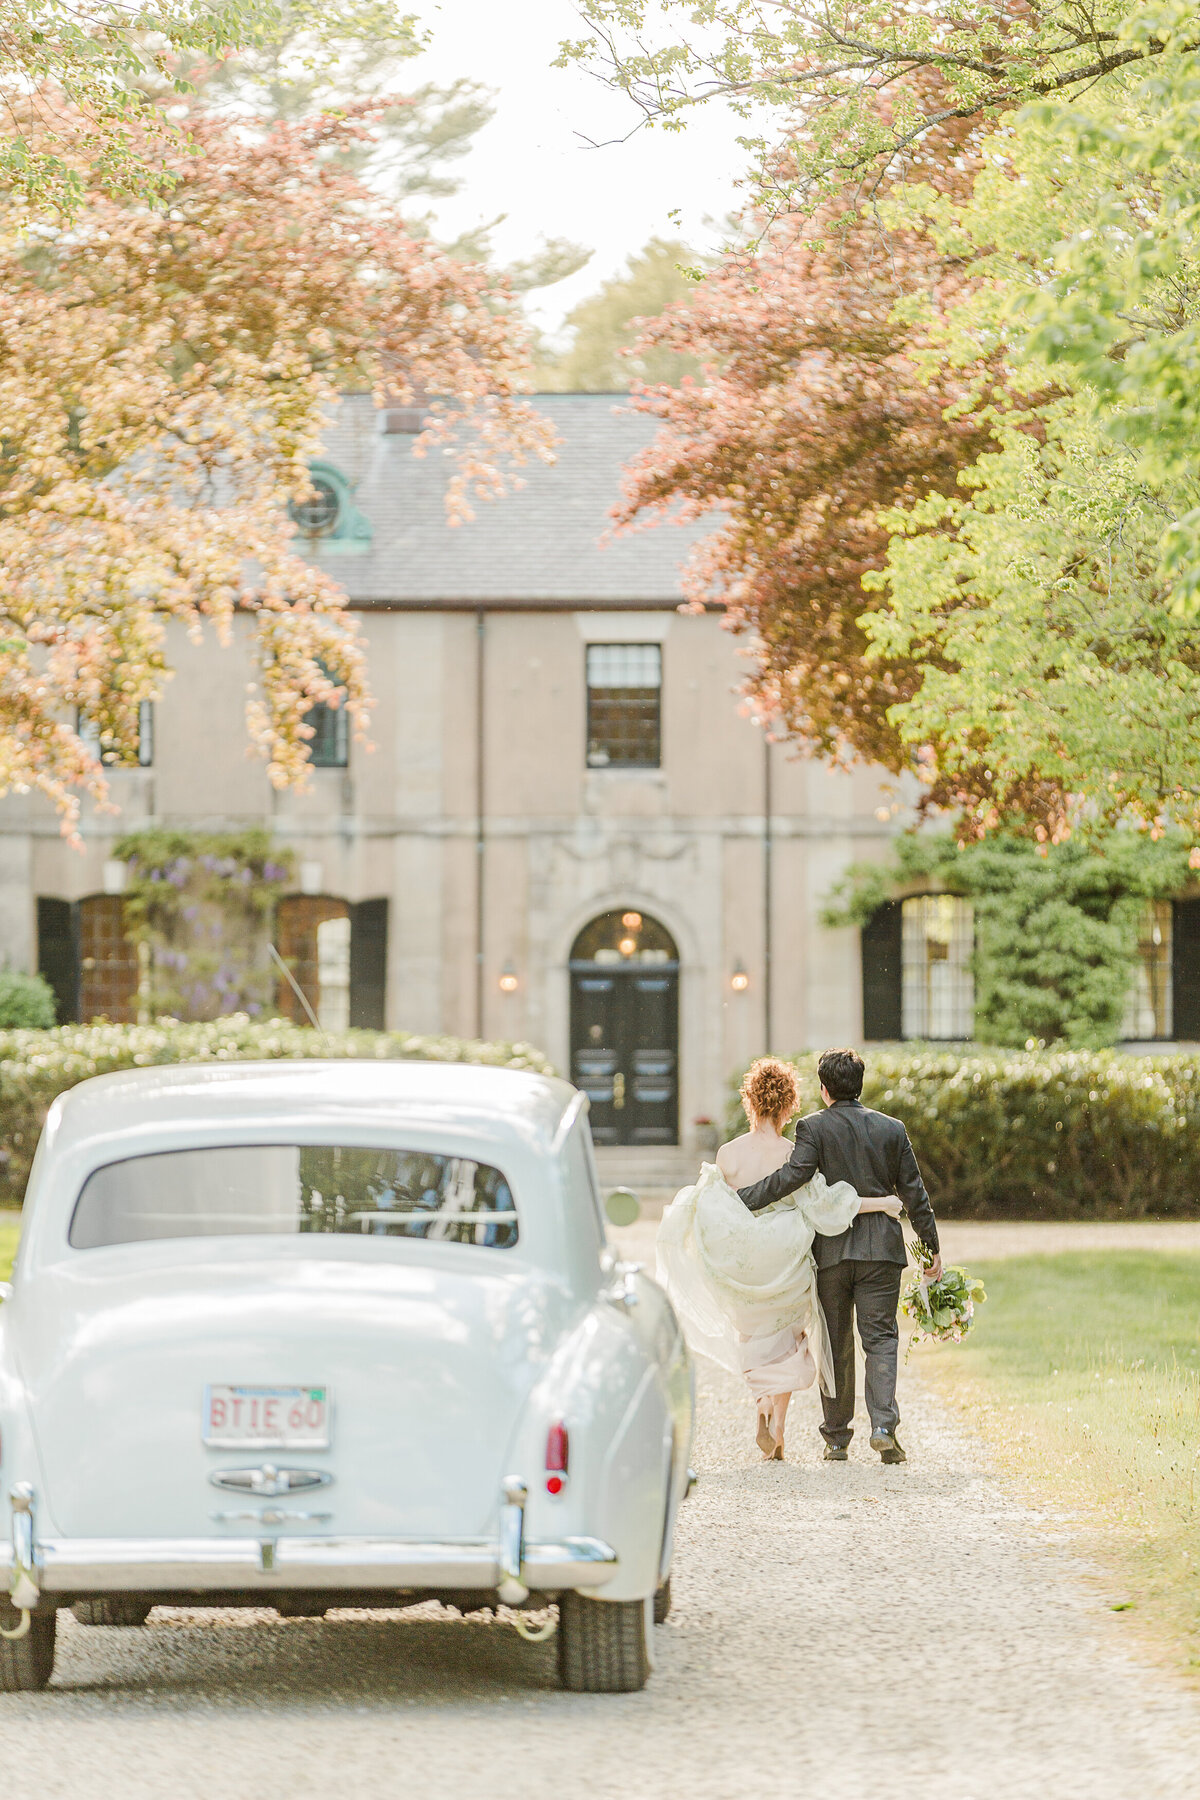 Bride and groom walk with their arms around each other's waist toward a historic building on the North Shore of Massachusetts. In the foreground there is a white vintage Rolls Royce. Captured by best Massachusetts wedding photographer Lia Rose Weddings